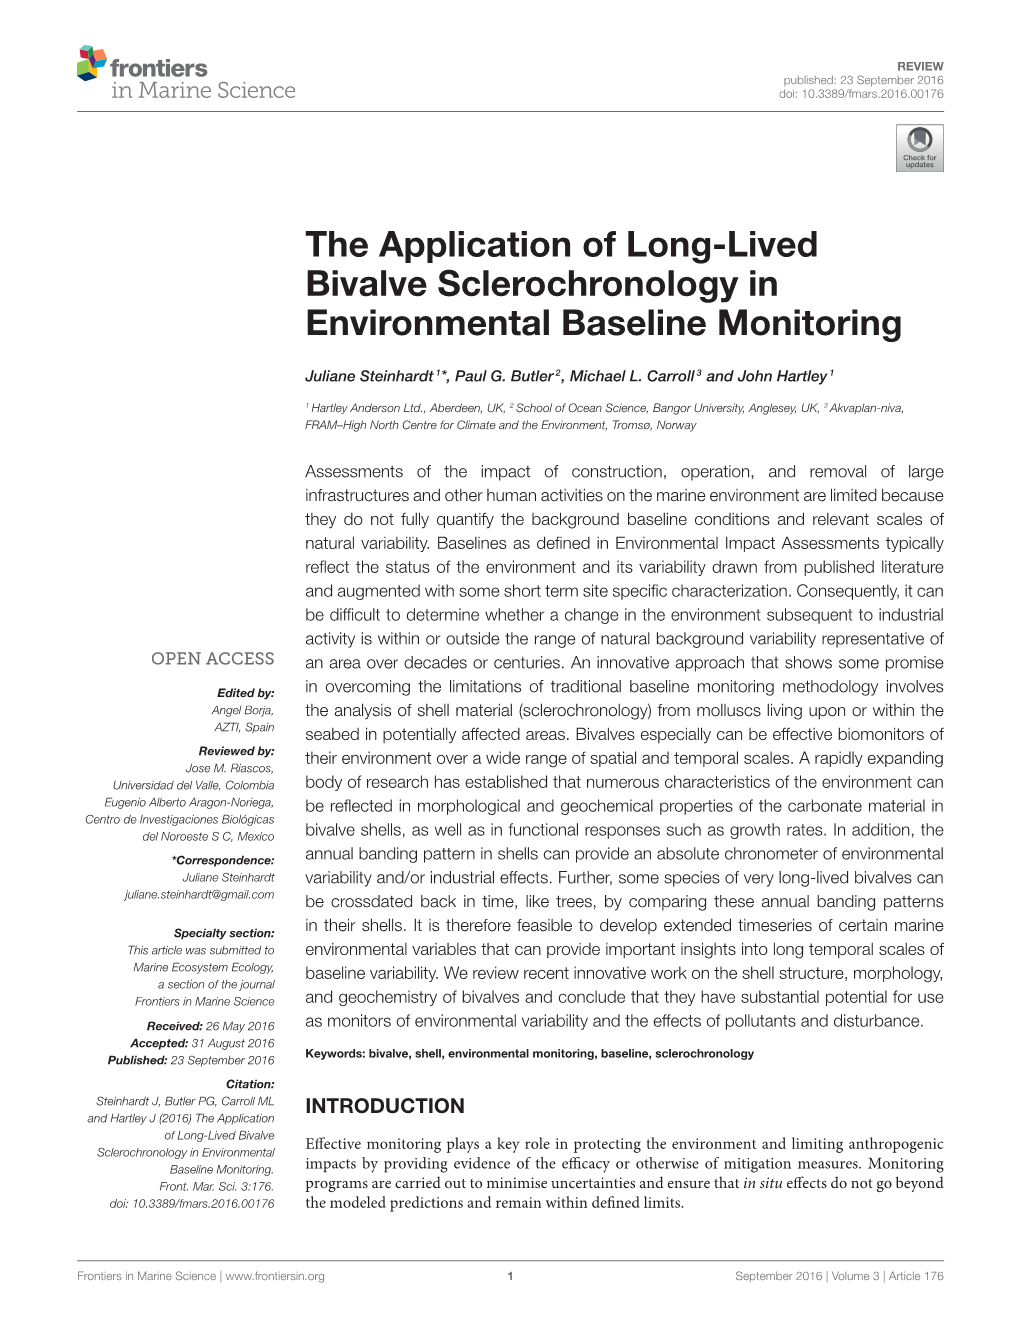 The Application of Long-Lived Bivalve Sclerochronology in Environmental Baseline Monitoring